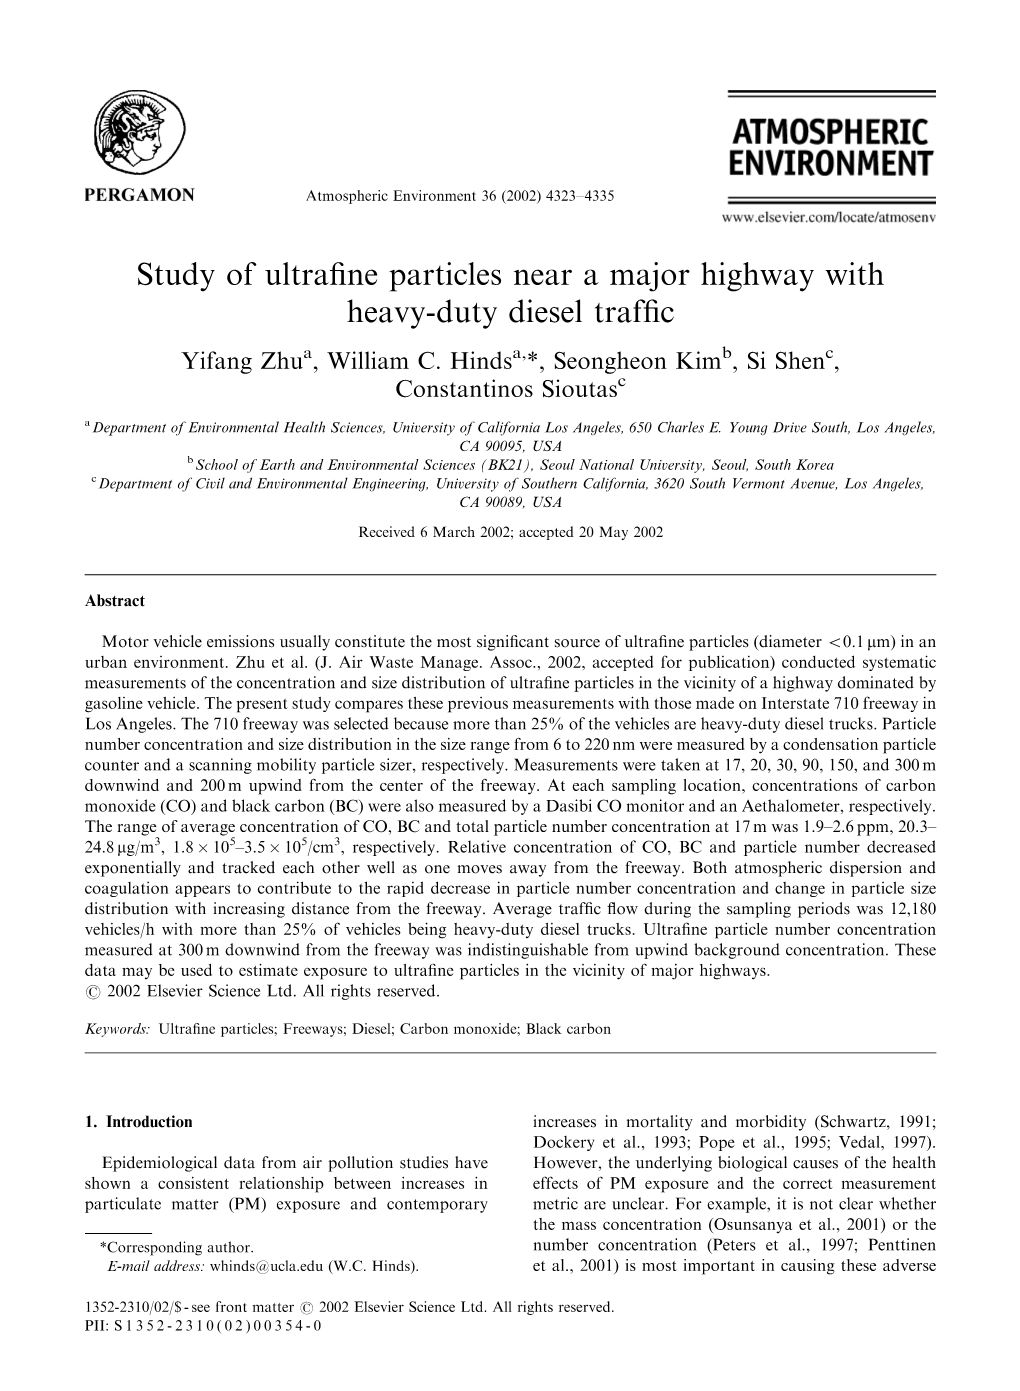 Study of Ultrafine Particles Near a Major Highway with Heavy-Duty Diesel Traffic